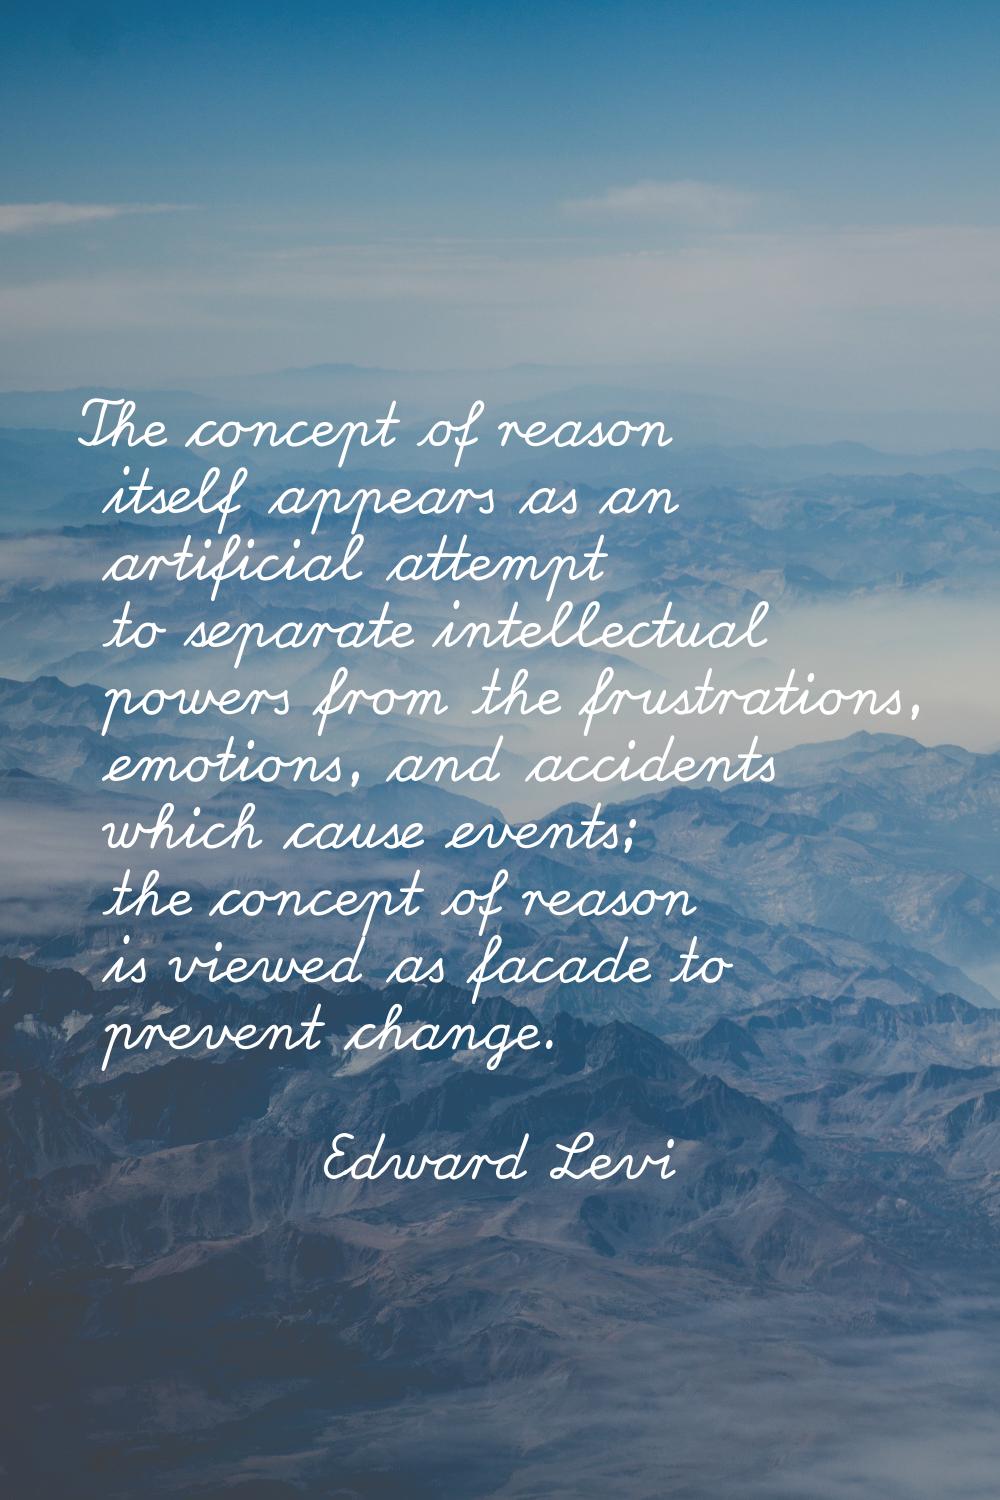 The concept of reason itself appears as an artificial attempt to separate intellectual powers from 